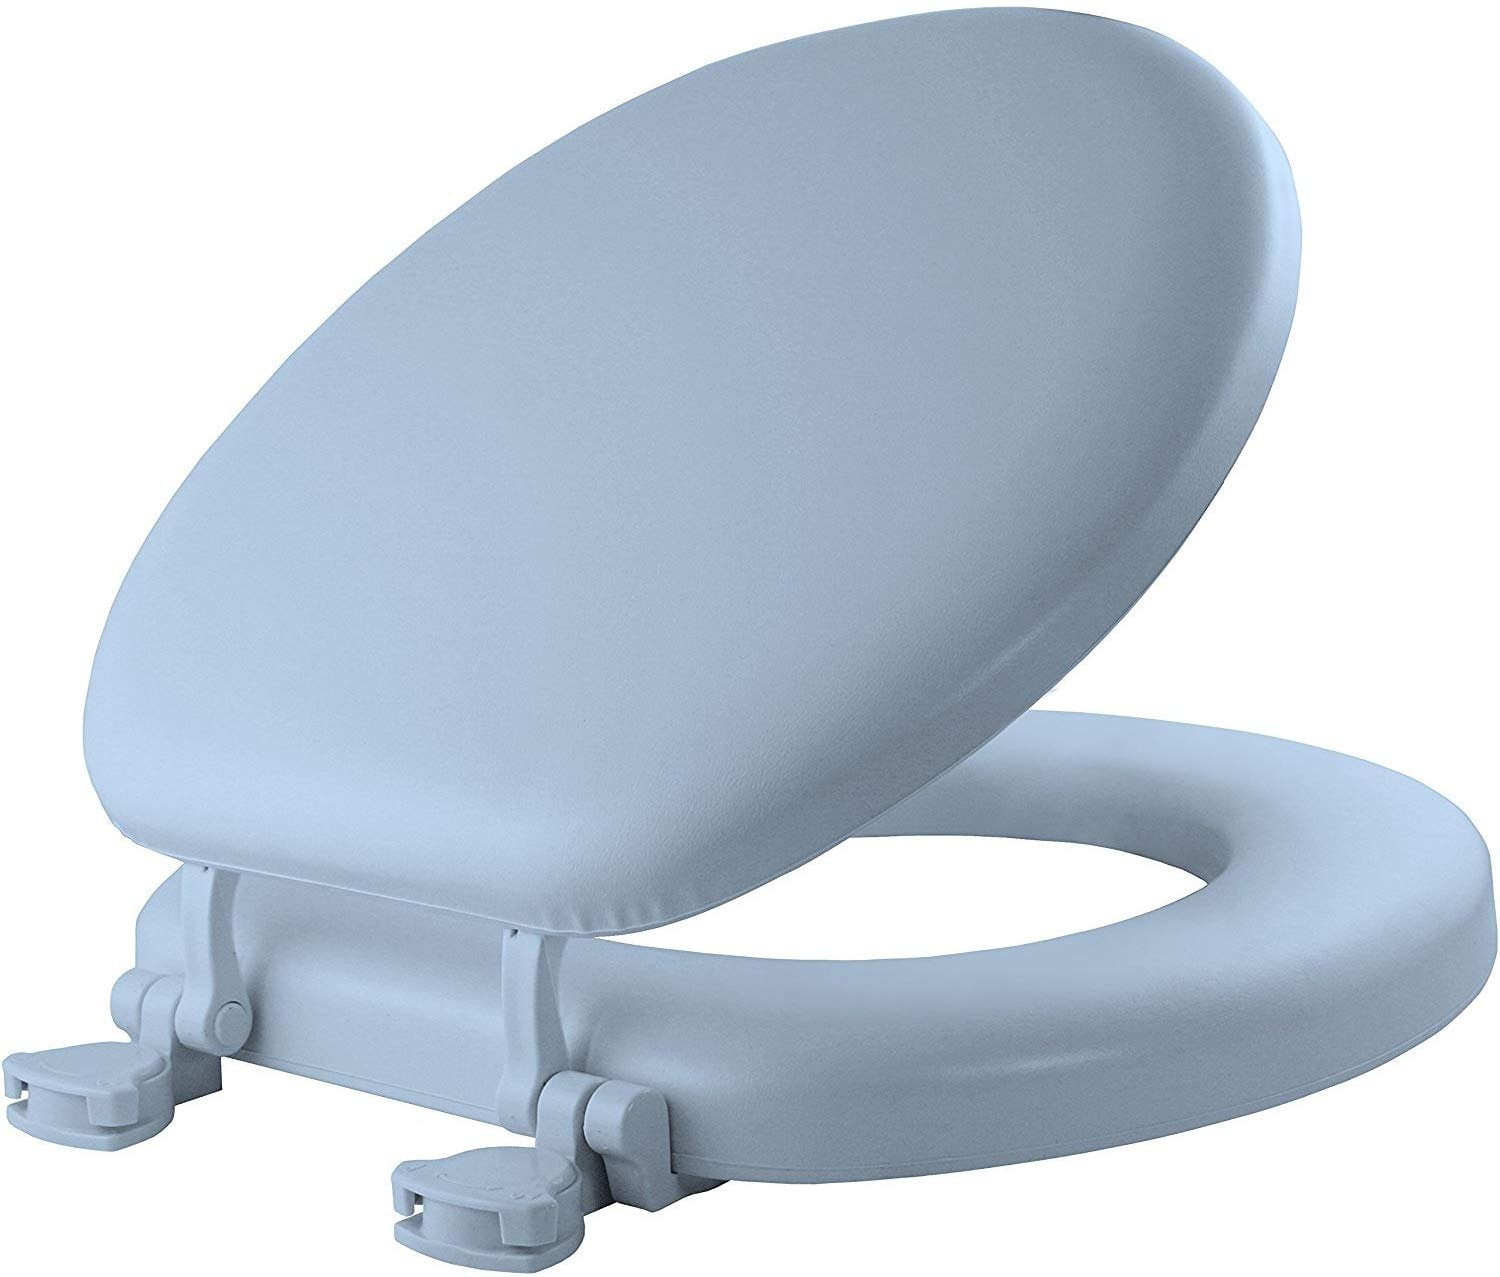 MAYFAIR 27ECA 000 Sculptured Swirl Toilet Seat will Never Loosen and Easily Remove ROUND White Durable Enameled Wood 